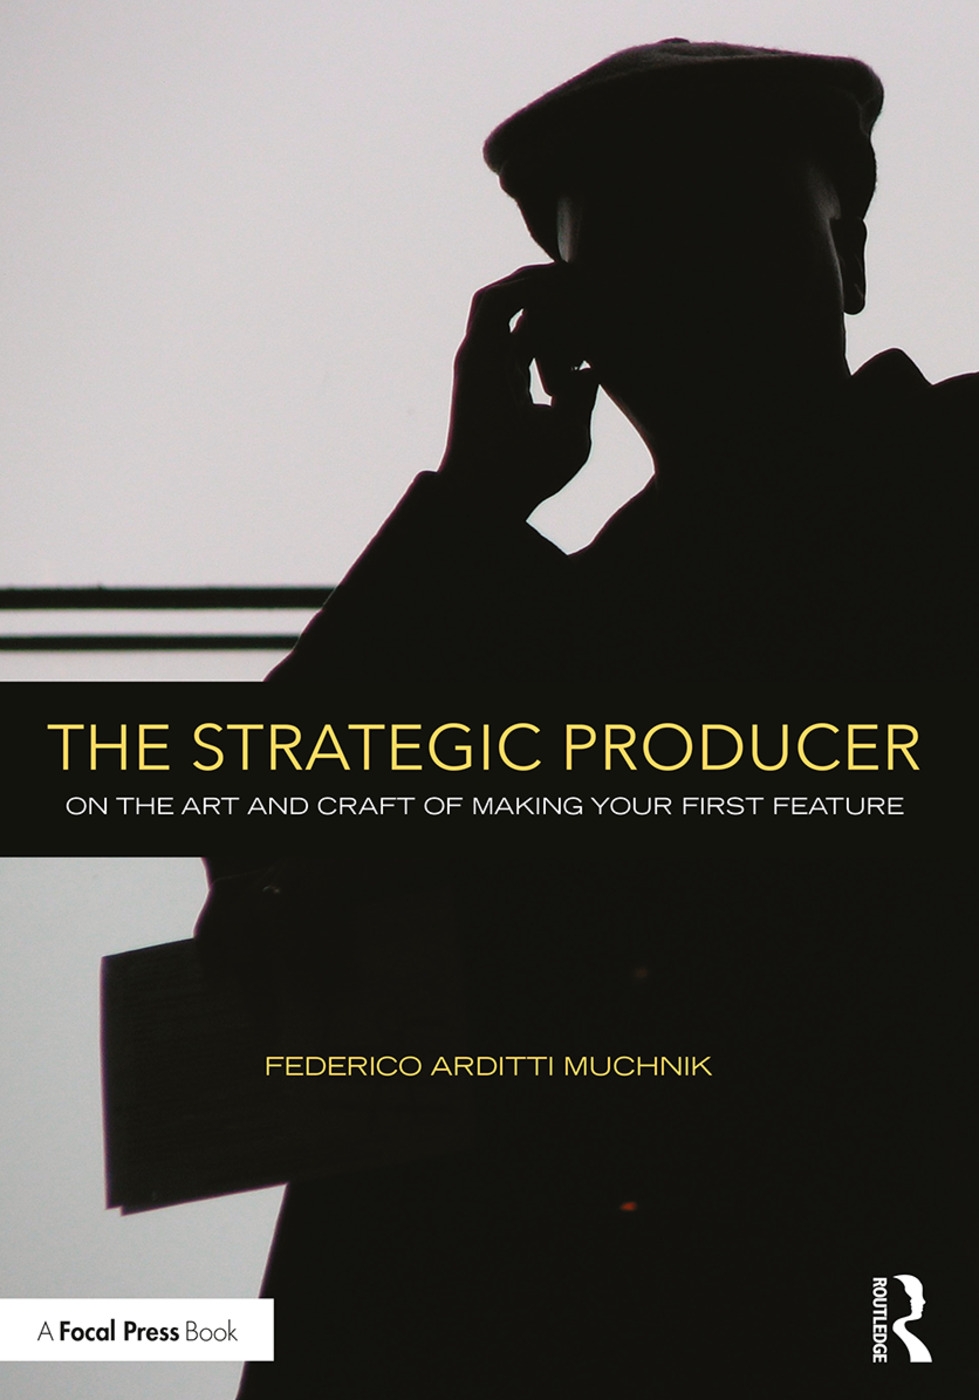 The Strategic Producer: On the Art and Craft of Making Your First Feature.